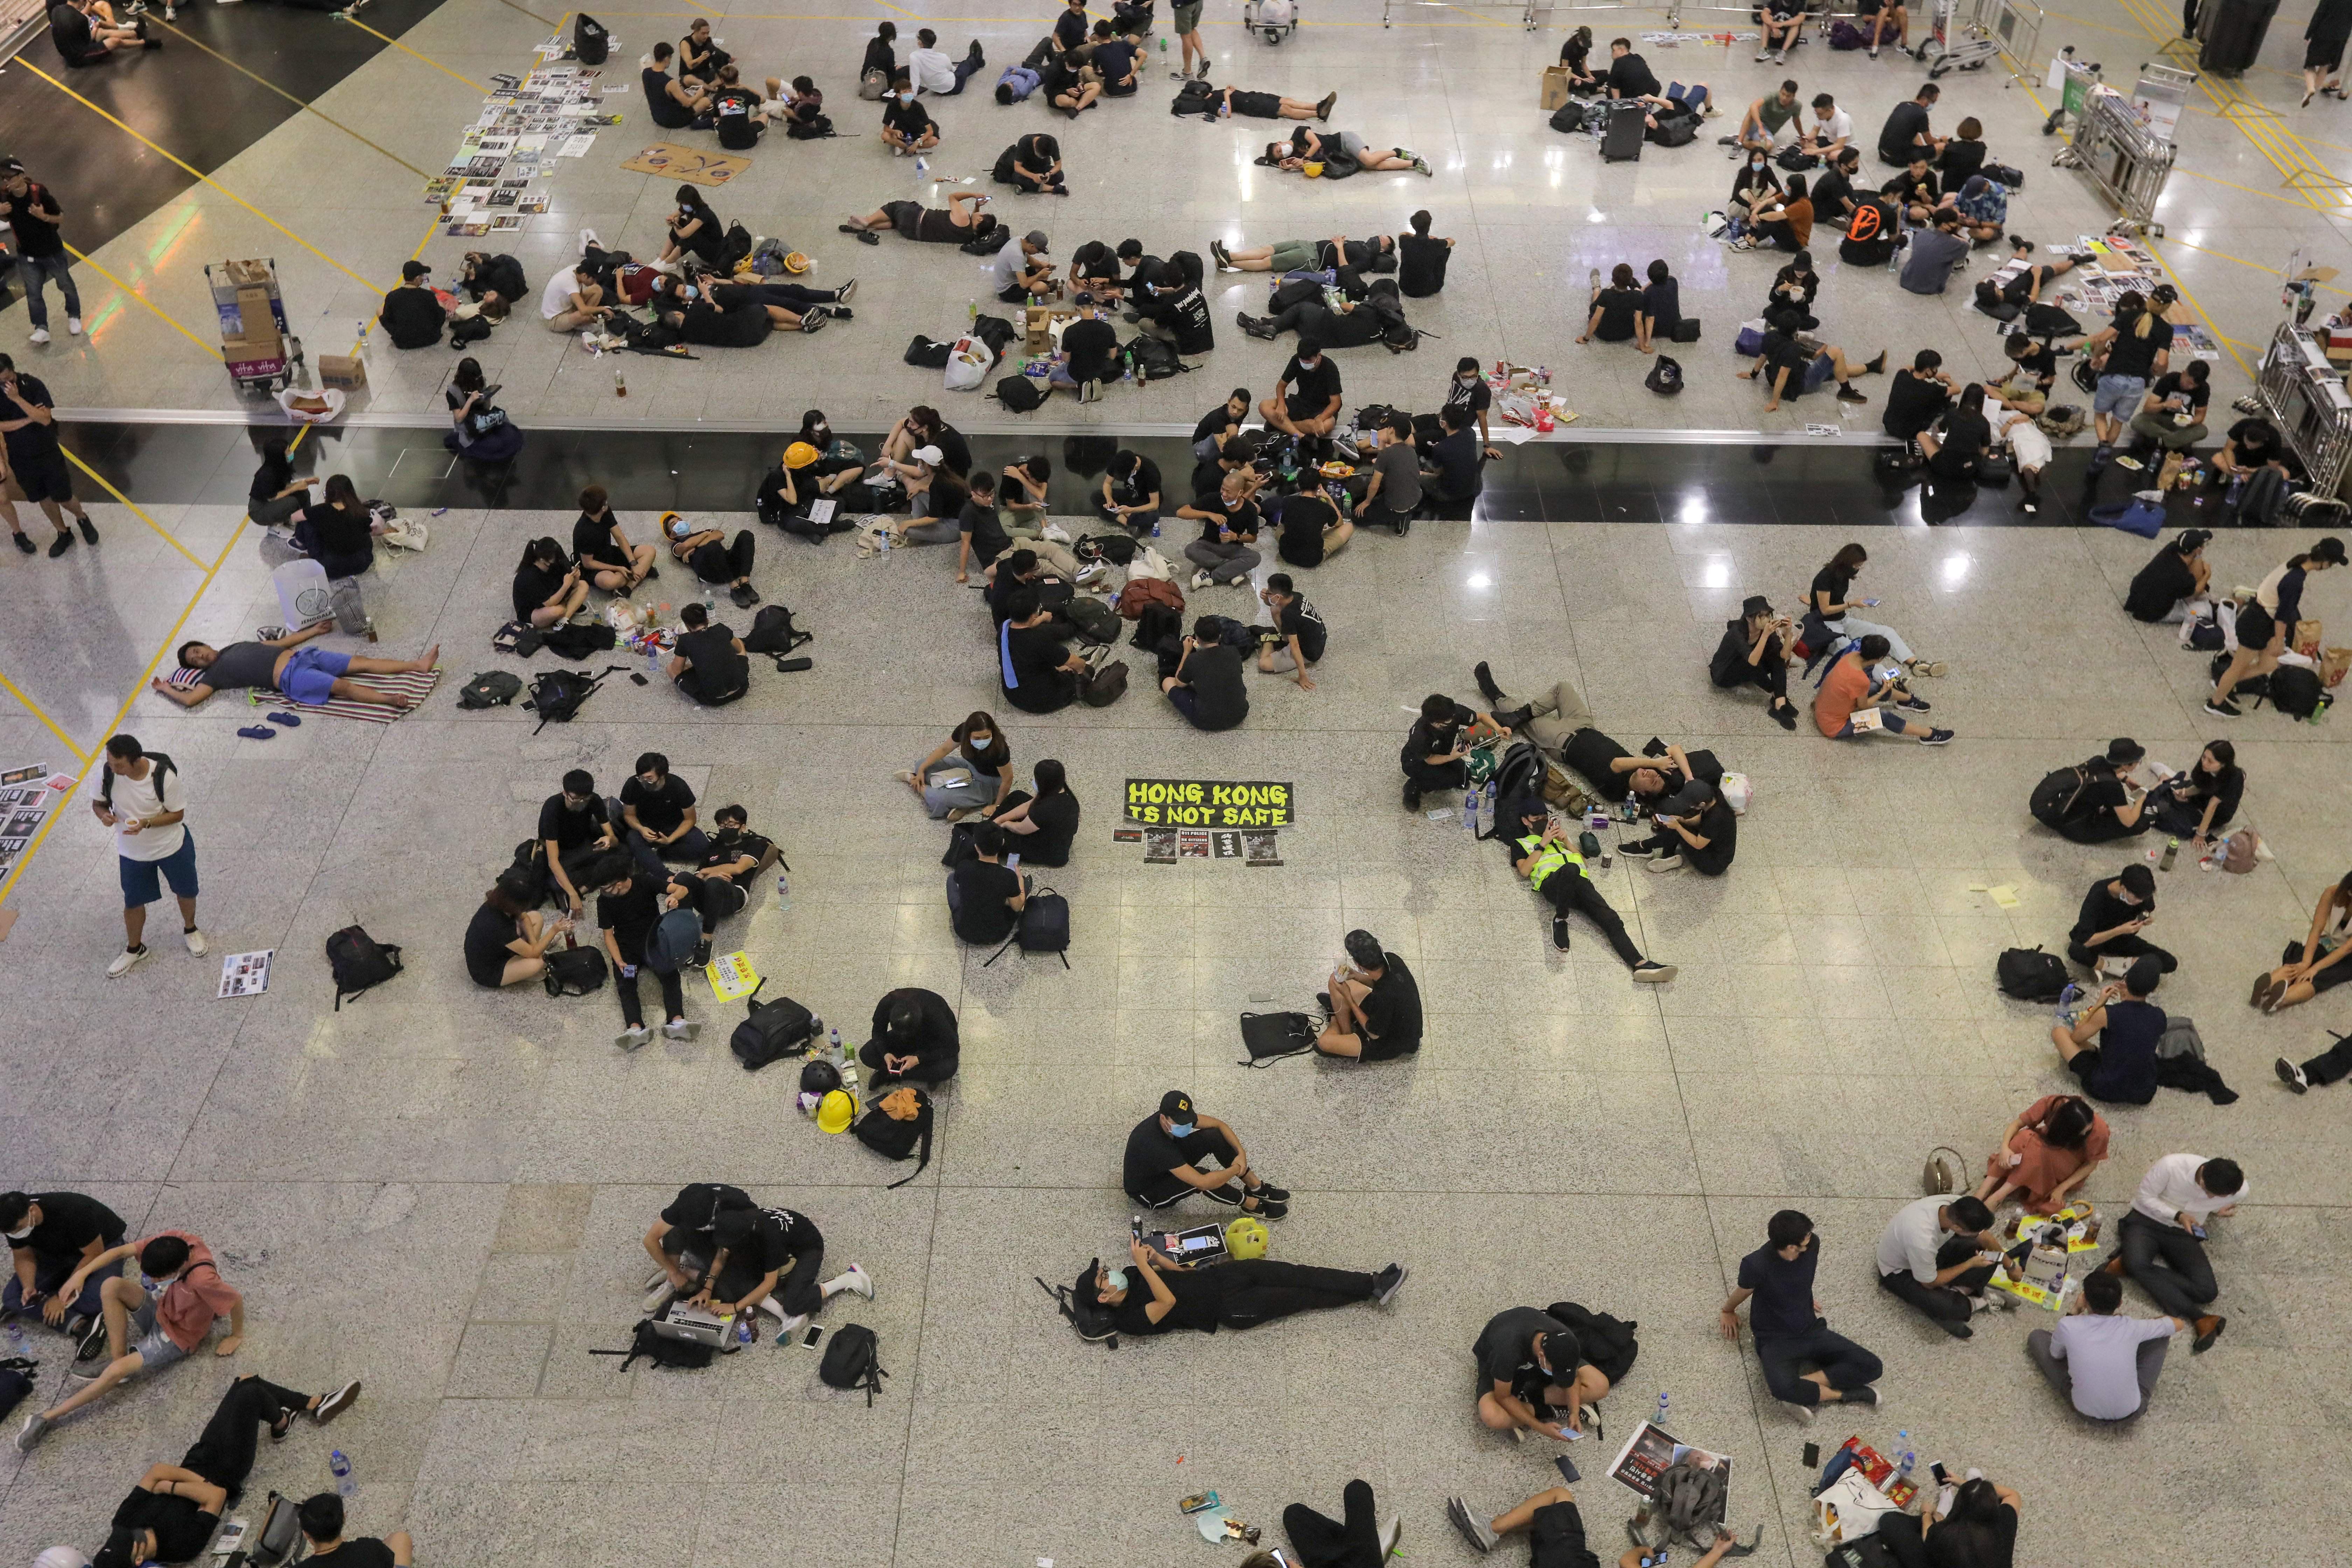 Protesters sit on the floor of the arrivals hall of the airport.